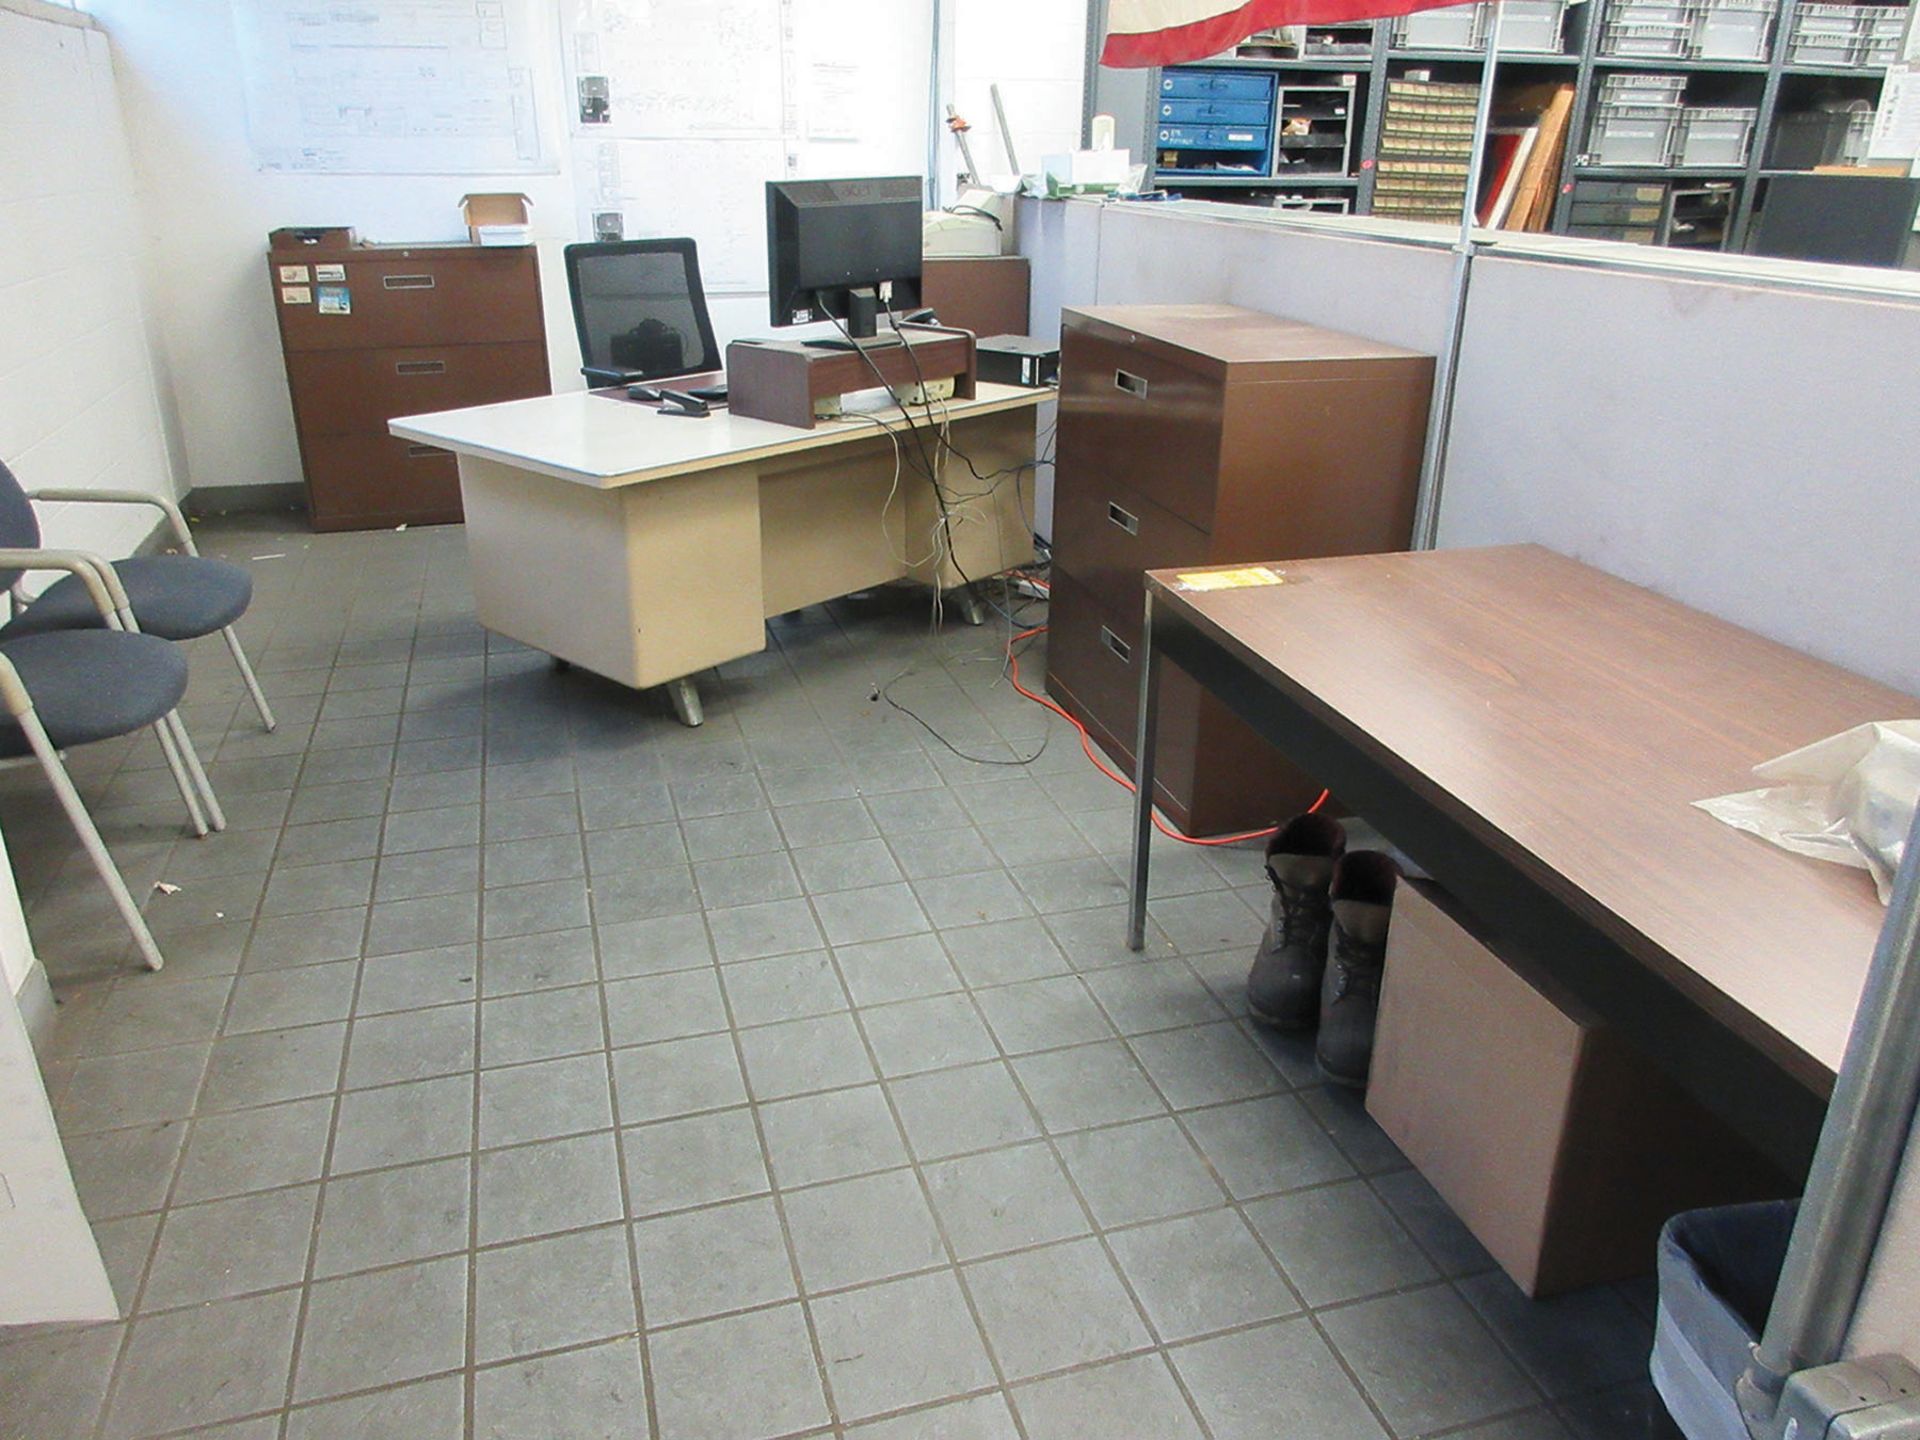 DESK, FILE CABINETS, AND LOCKERS